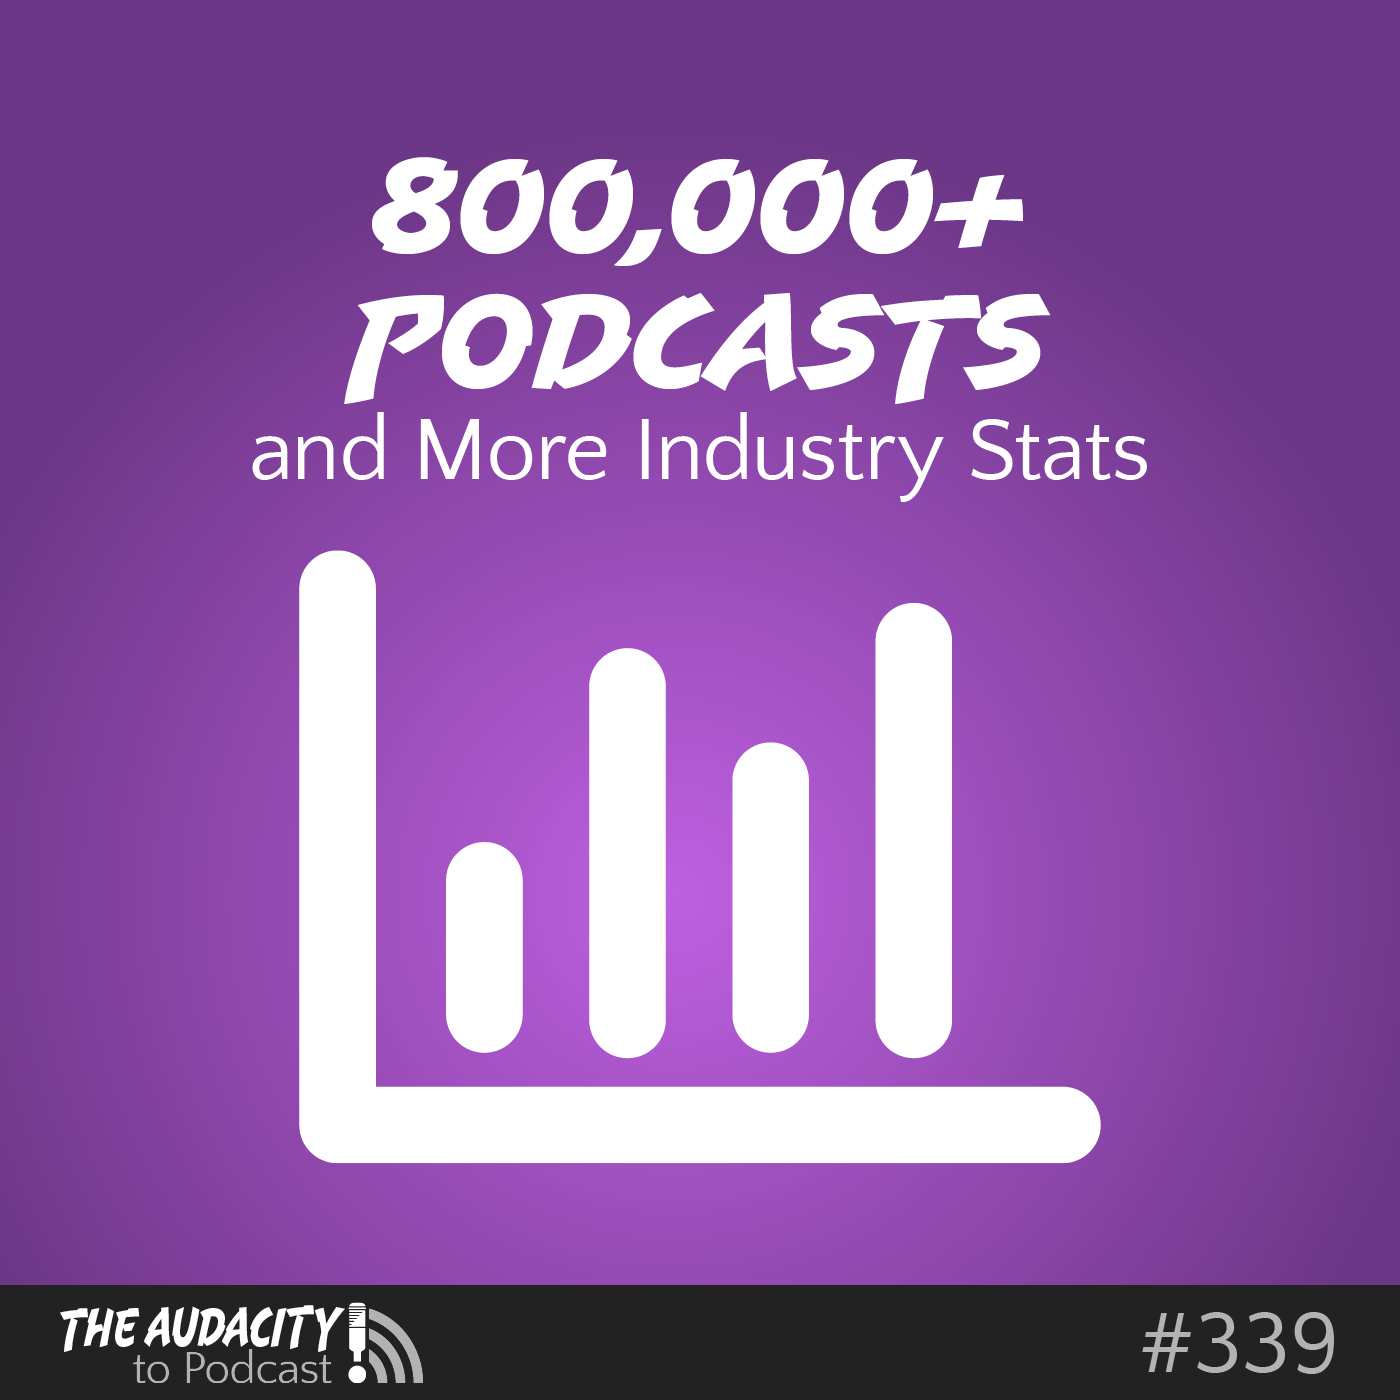 There Are Now More than 800,000 Podcasts, and More Industry Stats